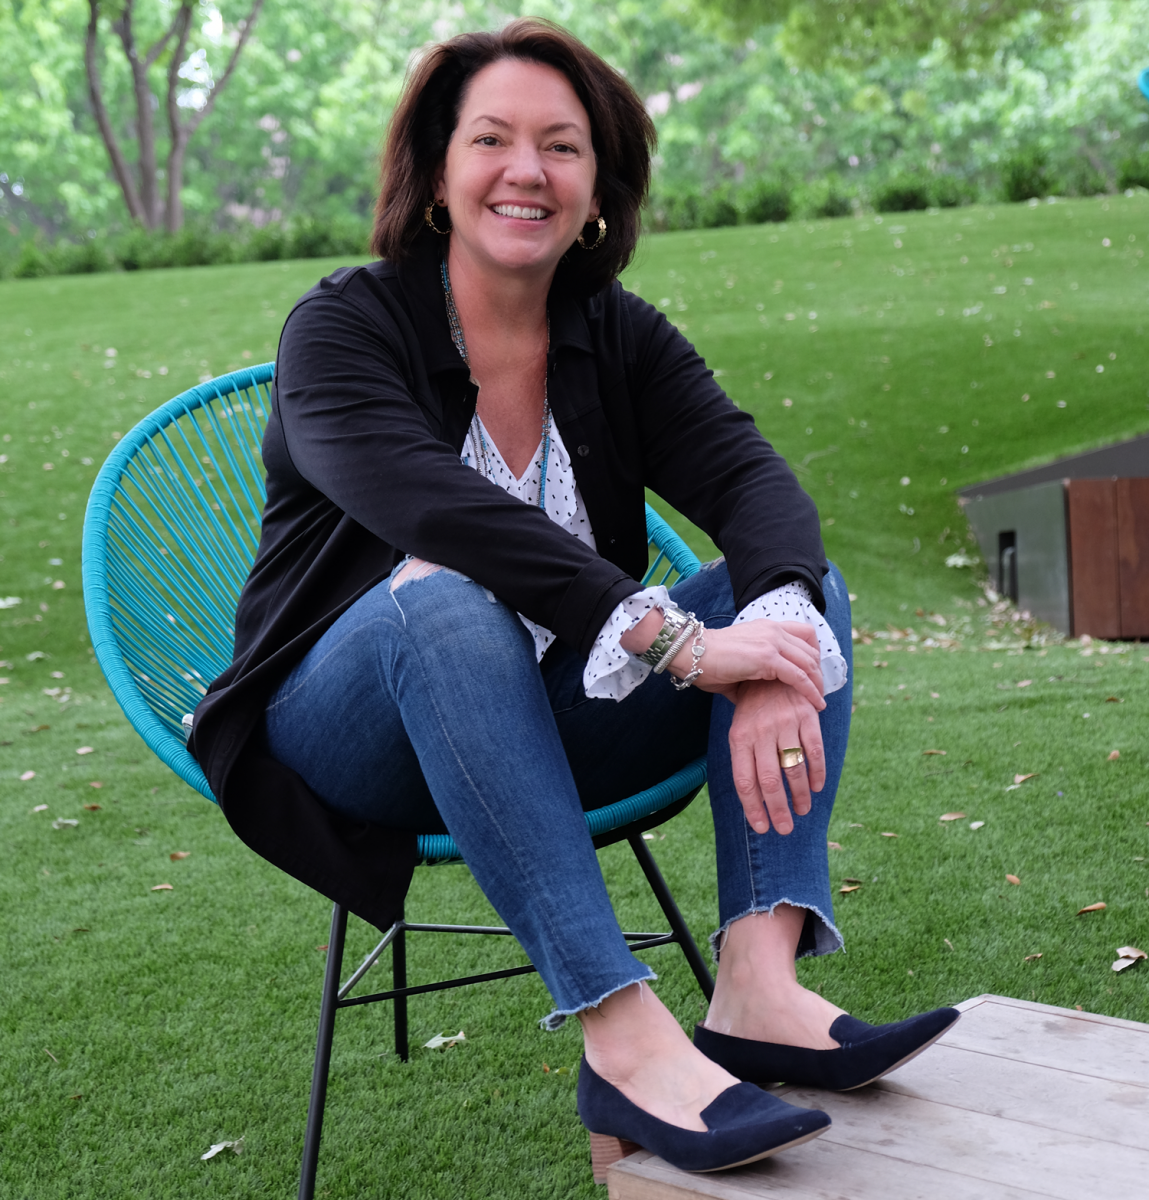 Laura Huffman seated in a teal blue chair with green grass behind her.